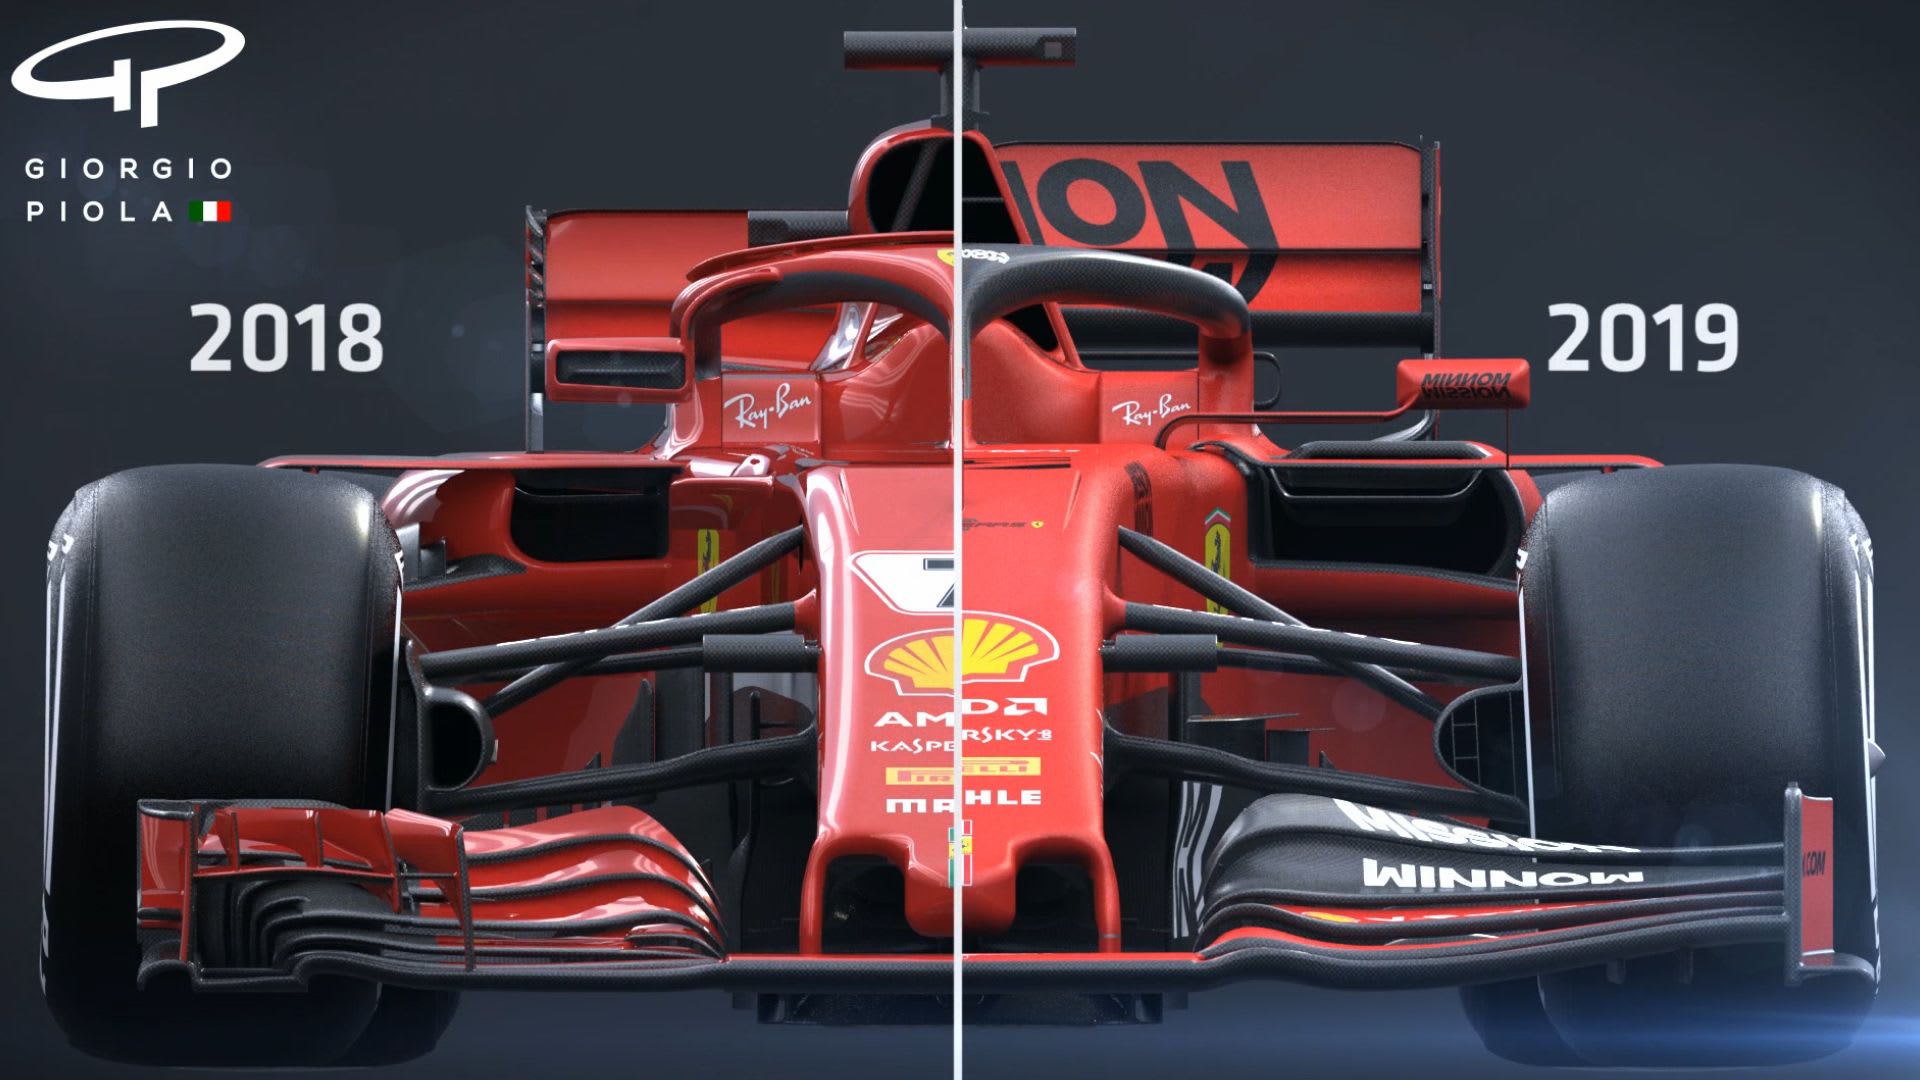 TECH TUESDAY: Exploring the differences between Ferrari’s 2018 and 2019 ...